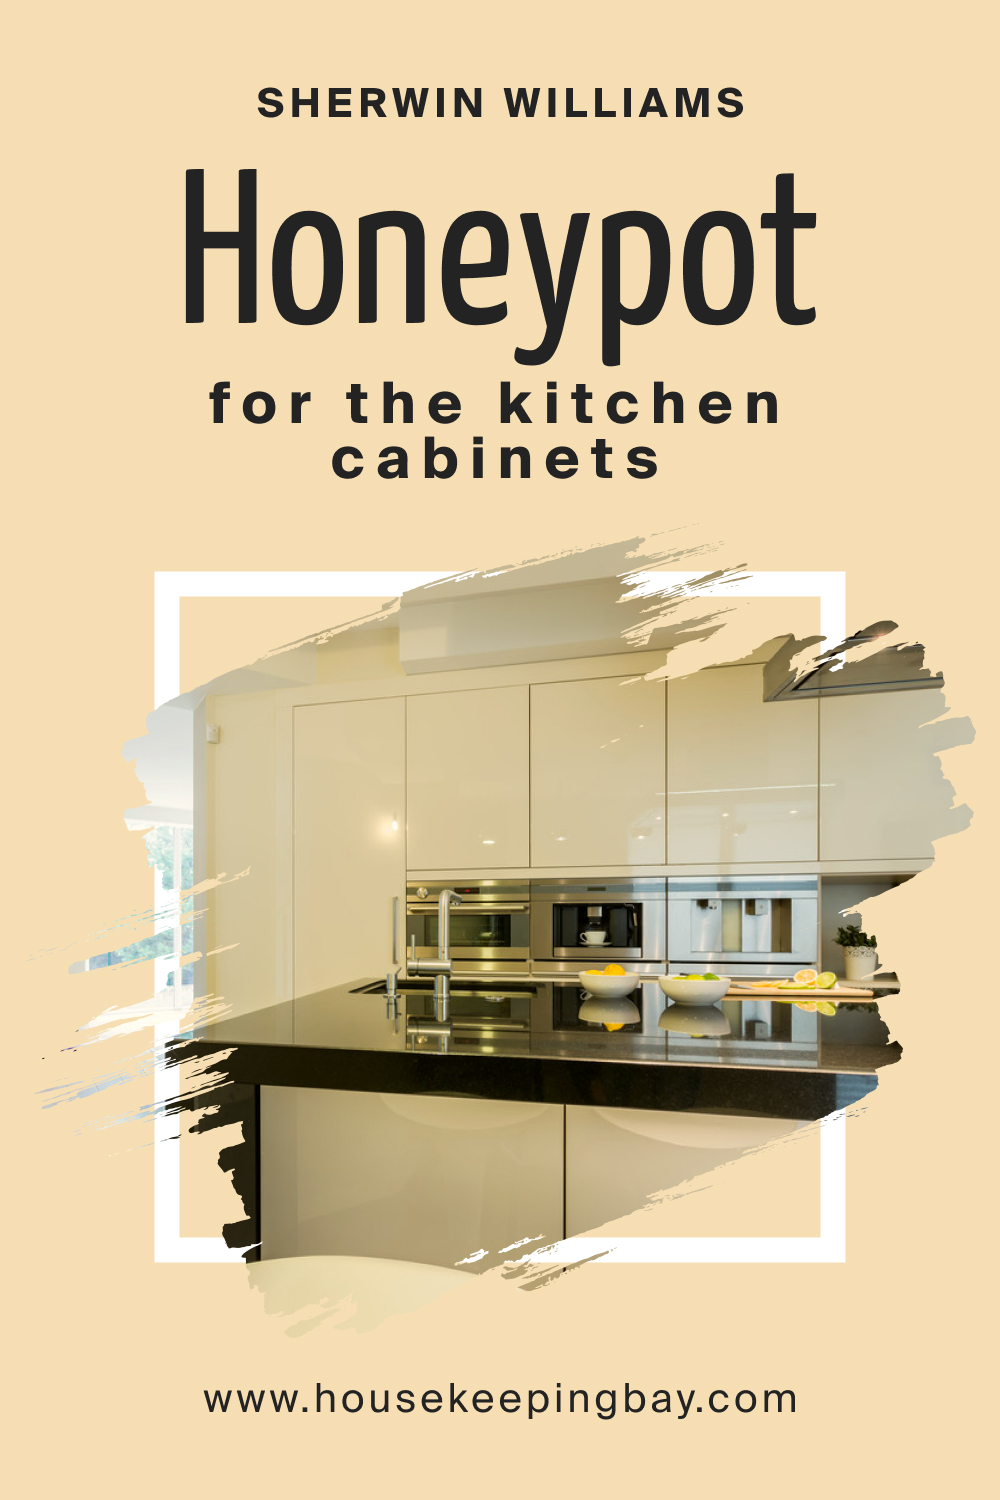 Sherwin Williams. SW 9663 Honeypot For the Kitchen Cabinets